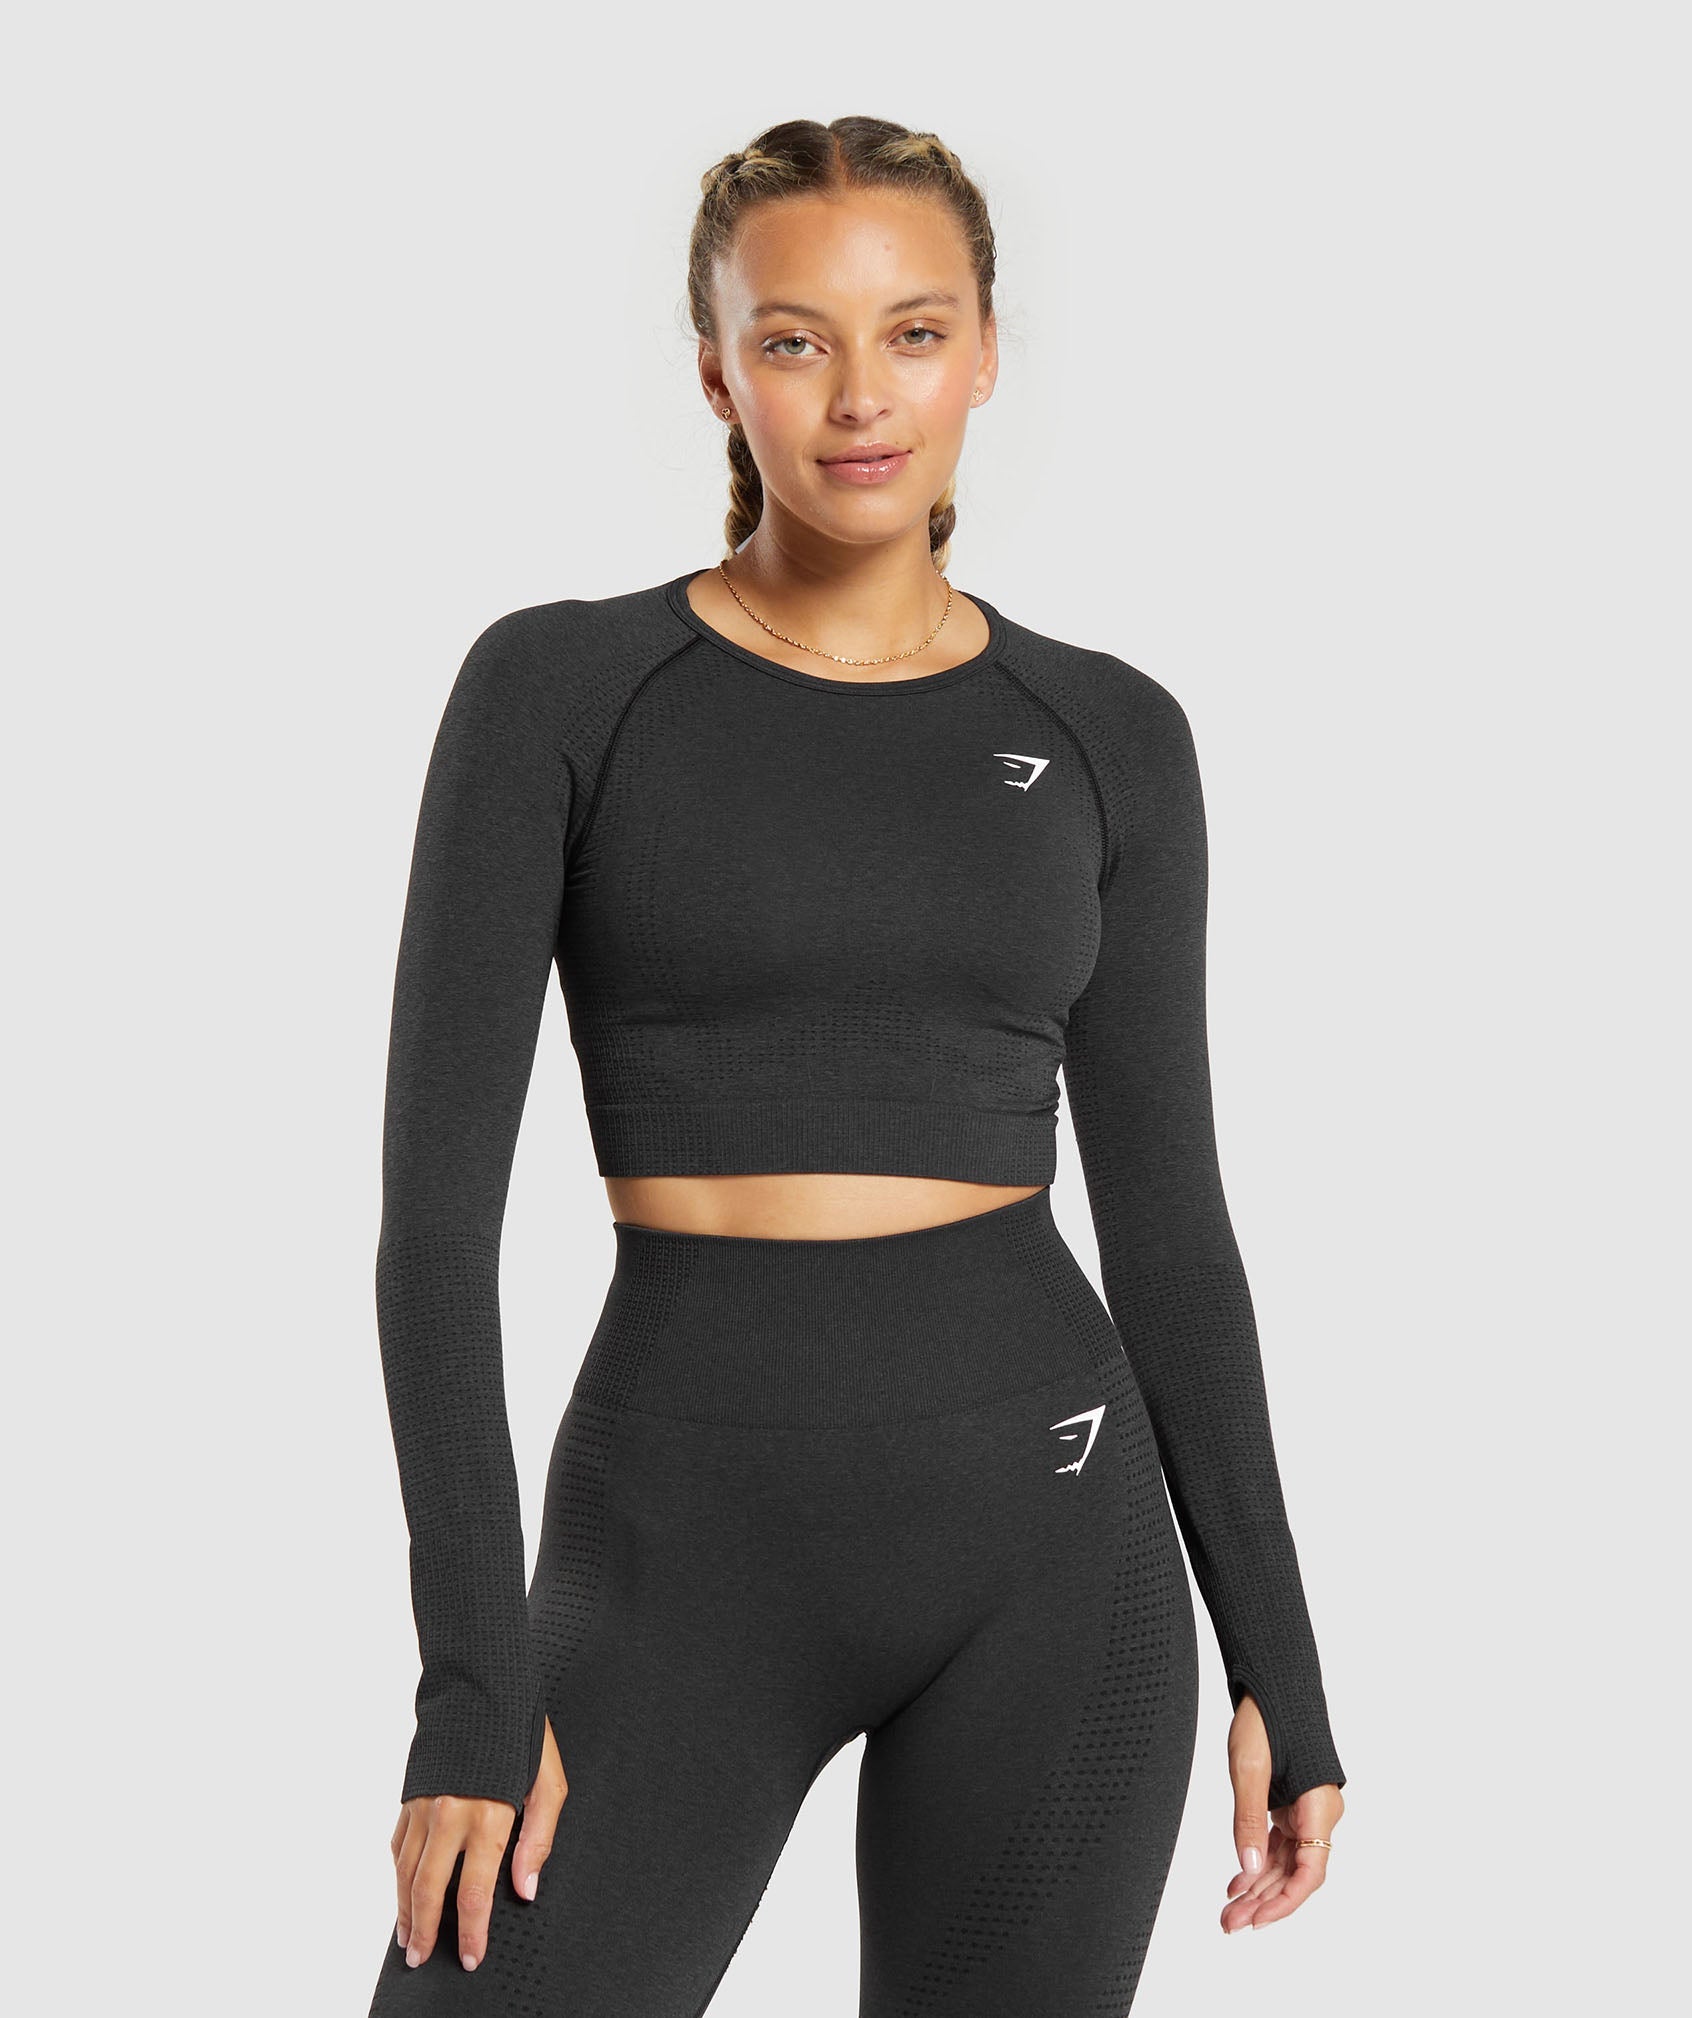 Gym Sets for Women Sale Clearance 2 Piece Outfits Seamless Tracksuit Set  Sport Workout Yoga Jogging Suit Slim Fit Long Sleeve Crop Top and High  Waist Leggings Ladies Tracksuits 